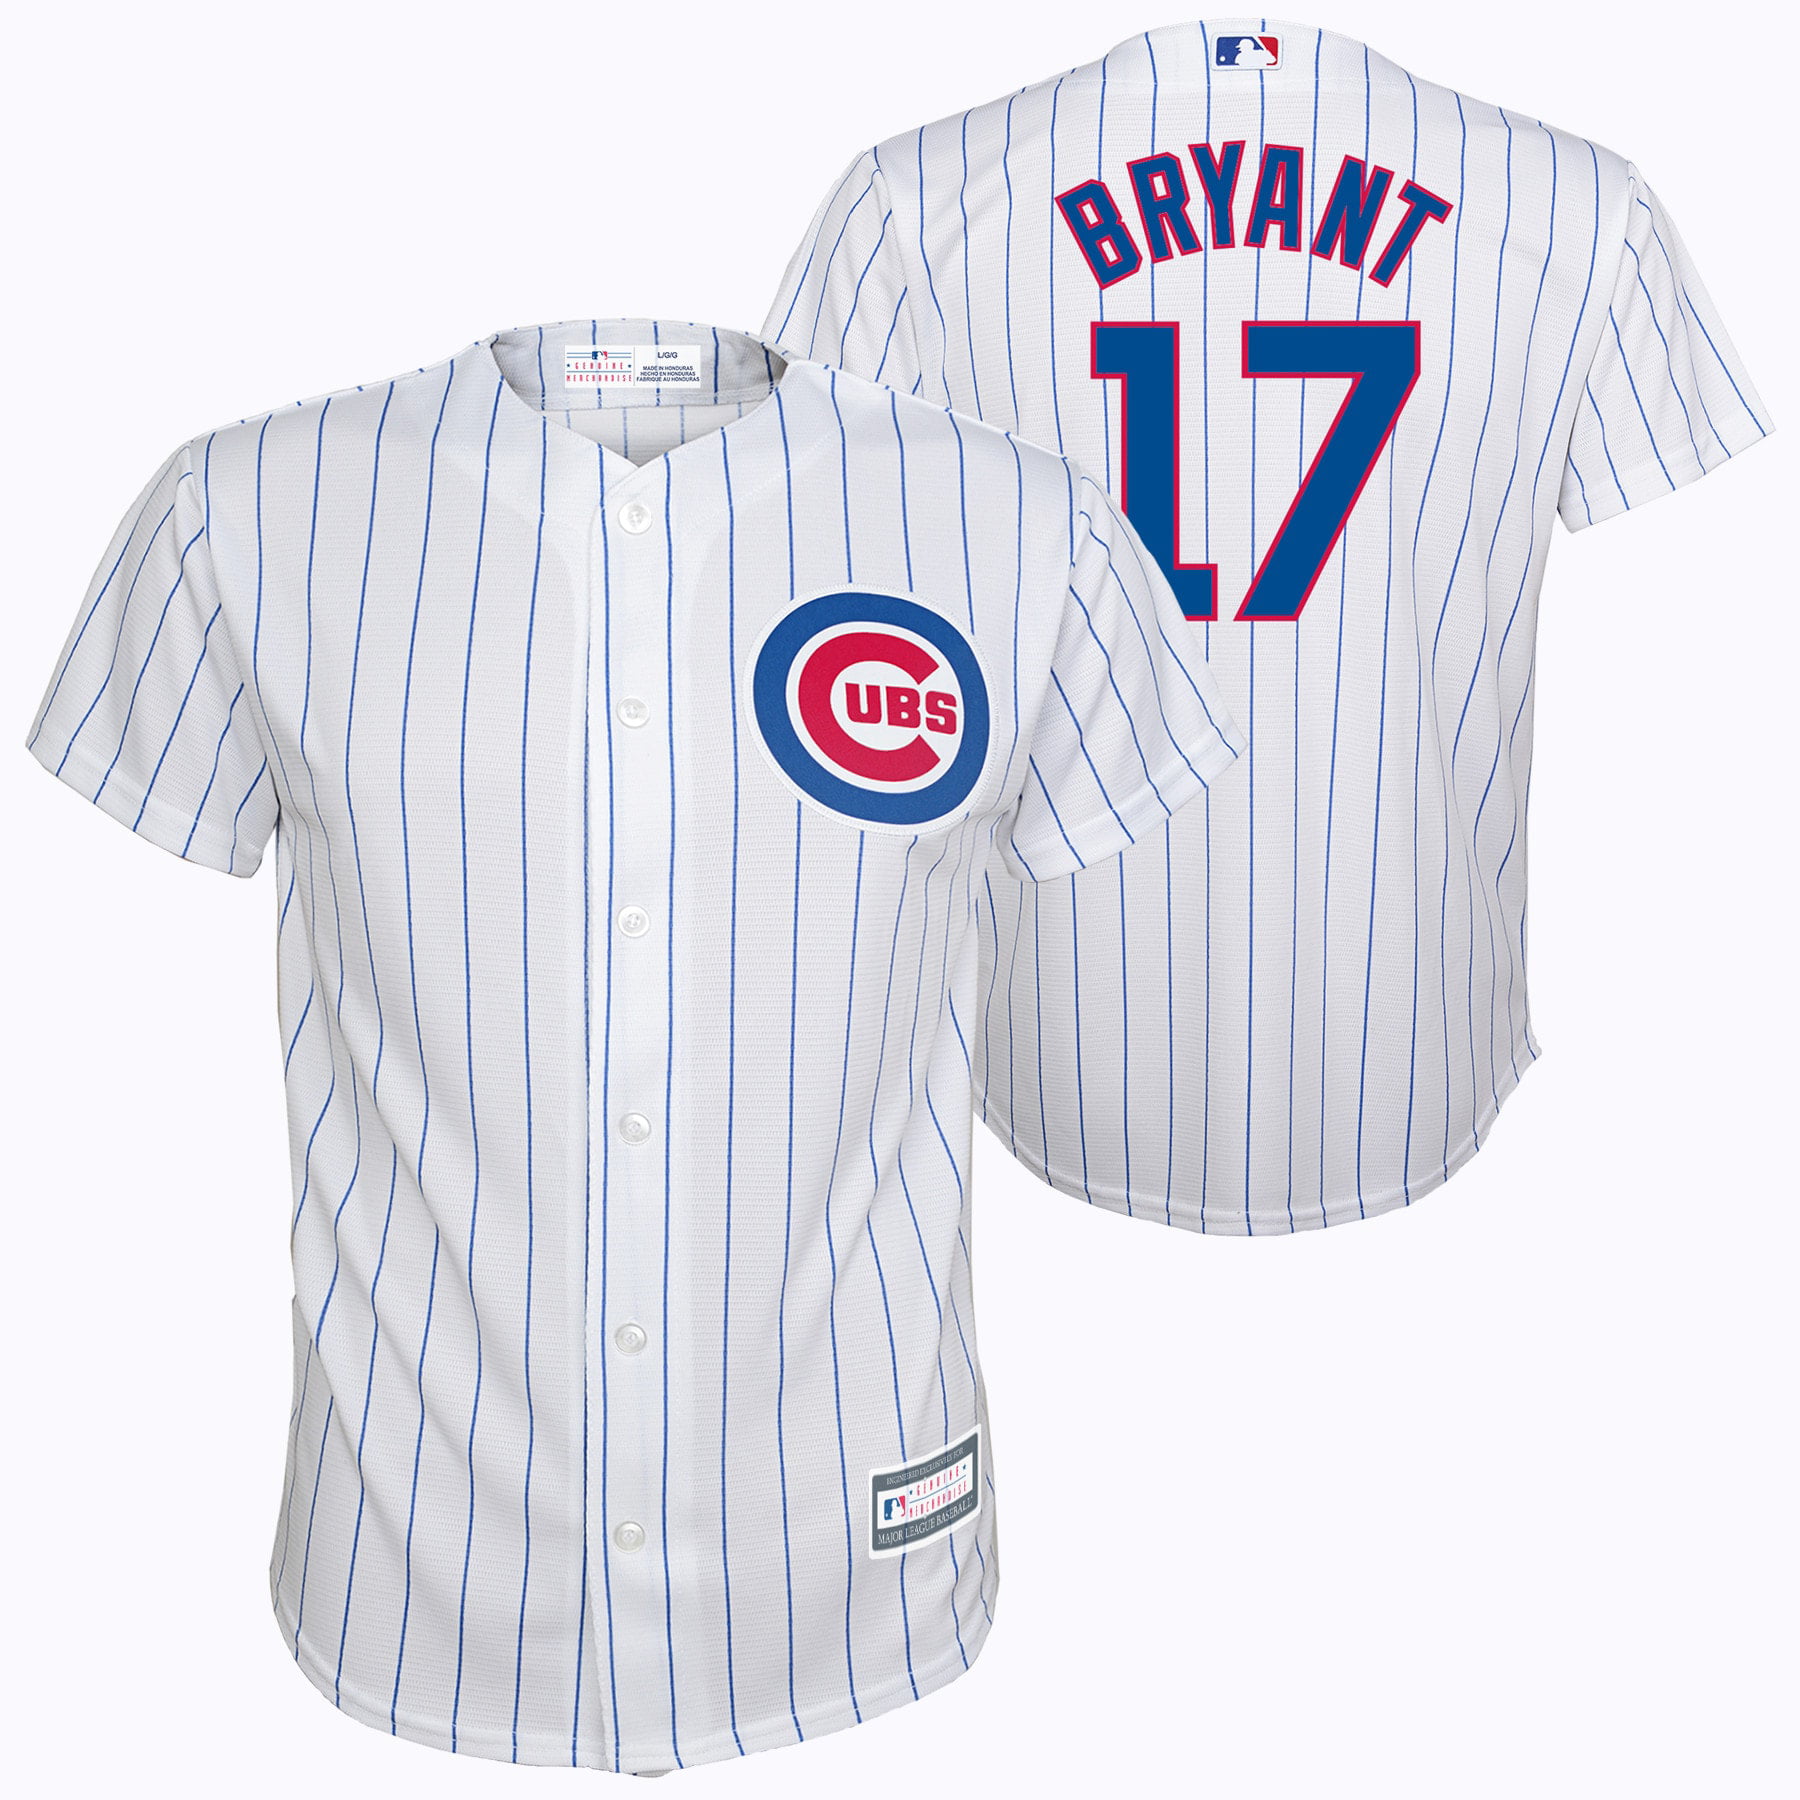 bryant cubs jersey